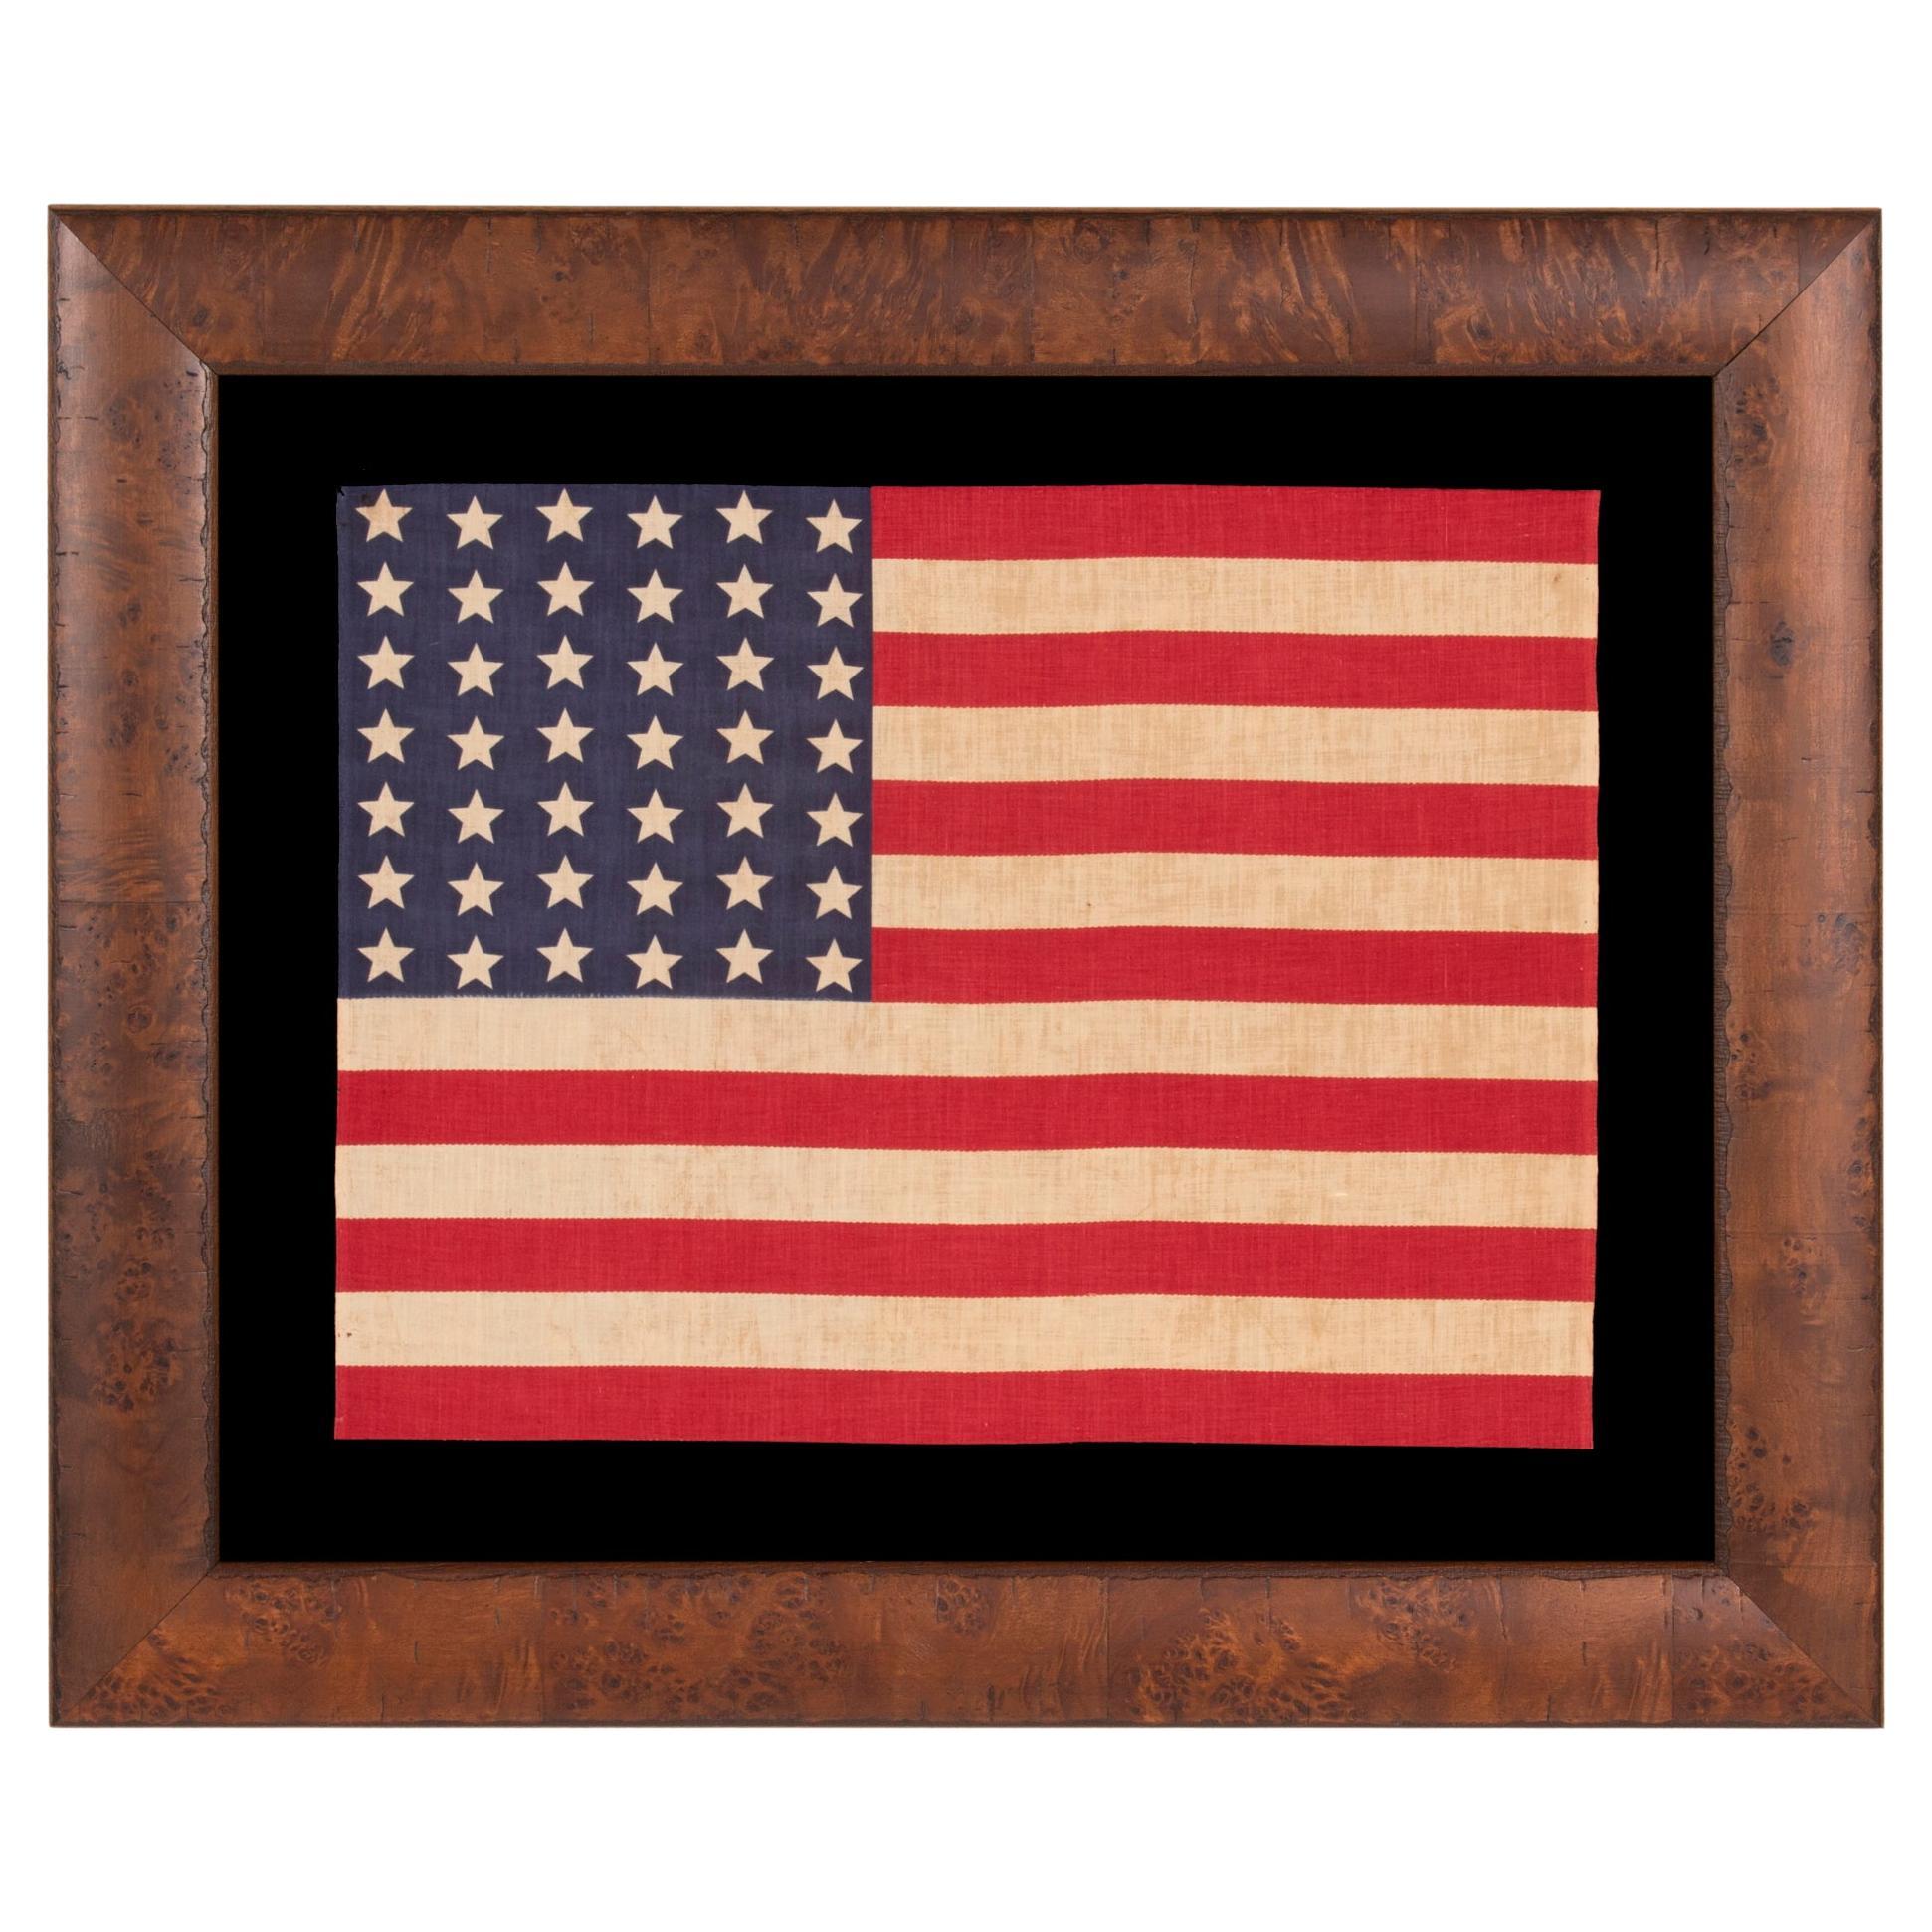 42 Star Antique American Flag with Stars in a Wave Configuration circa 1889-1890